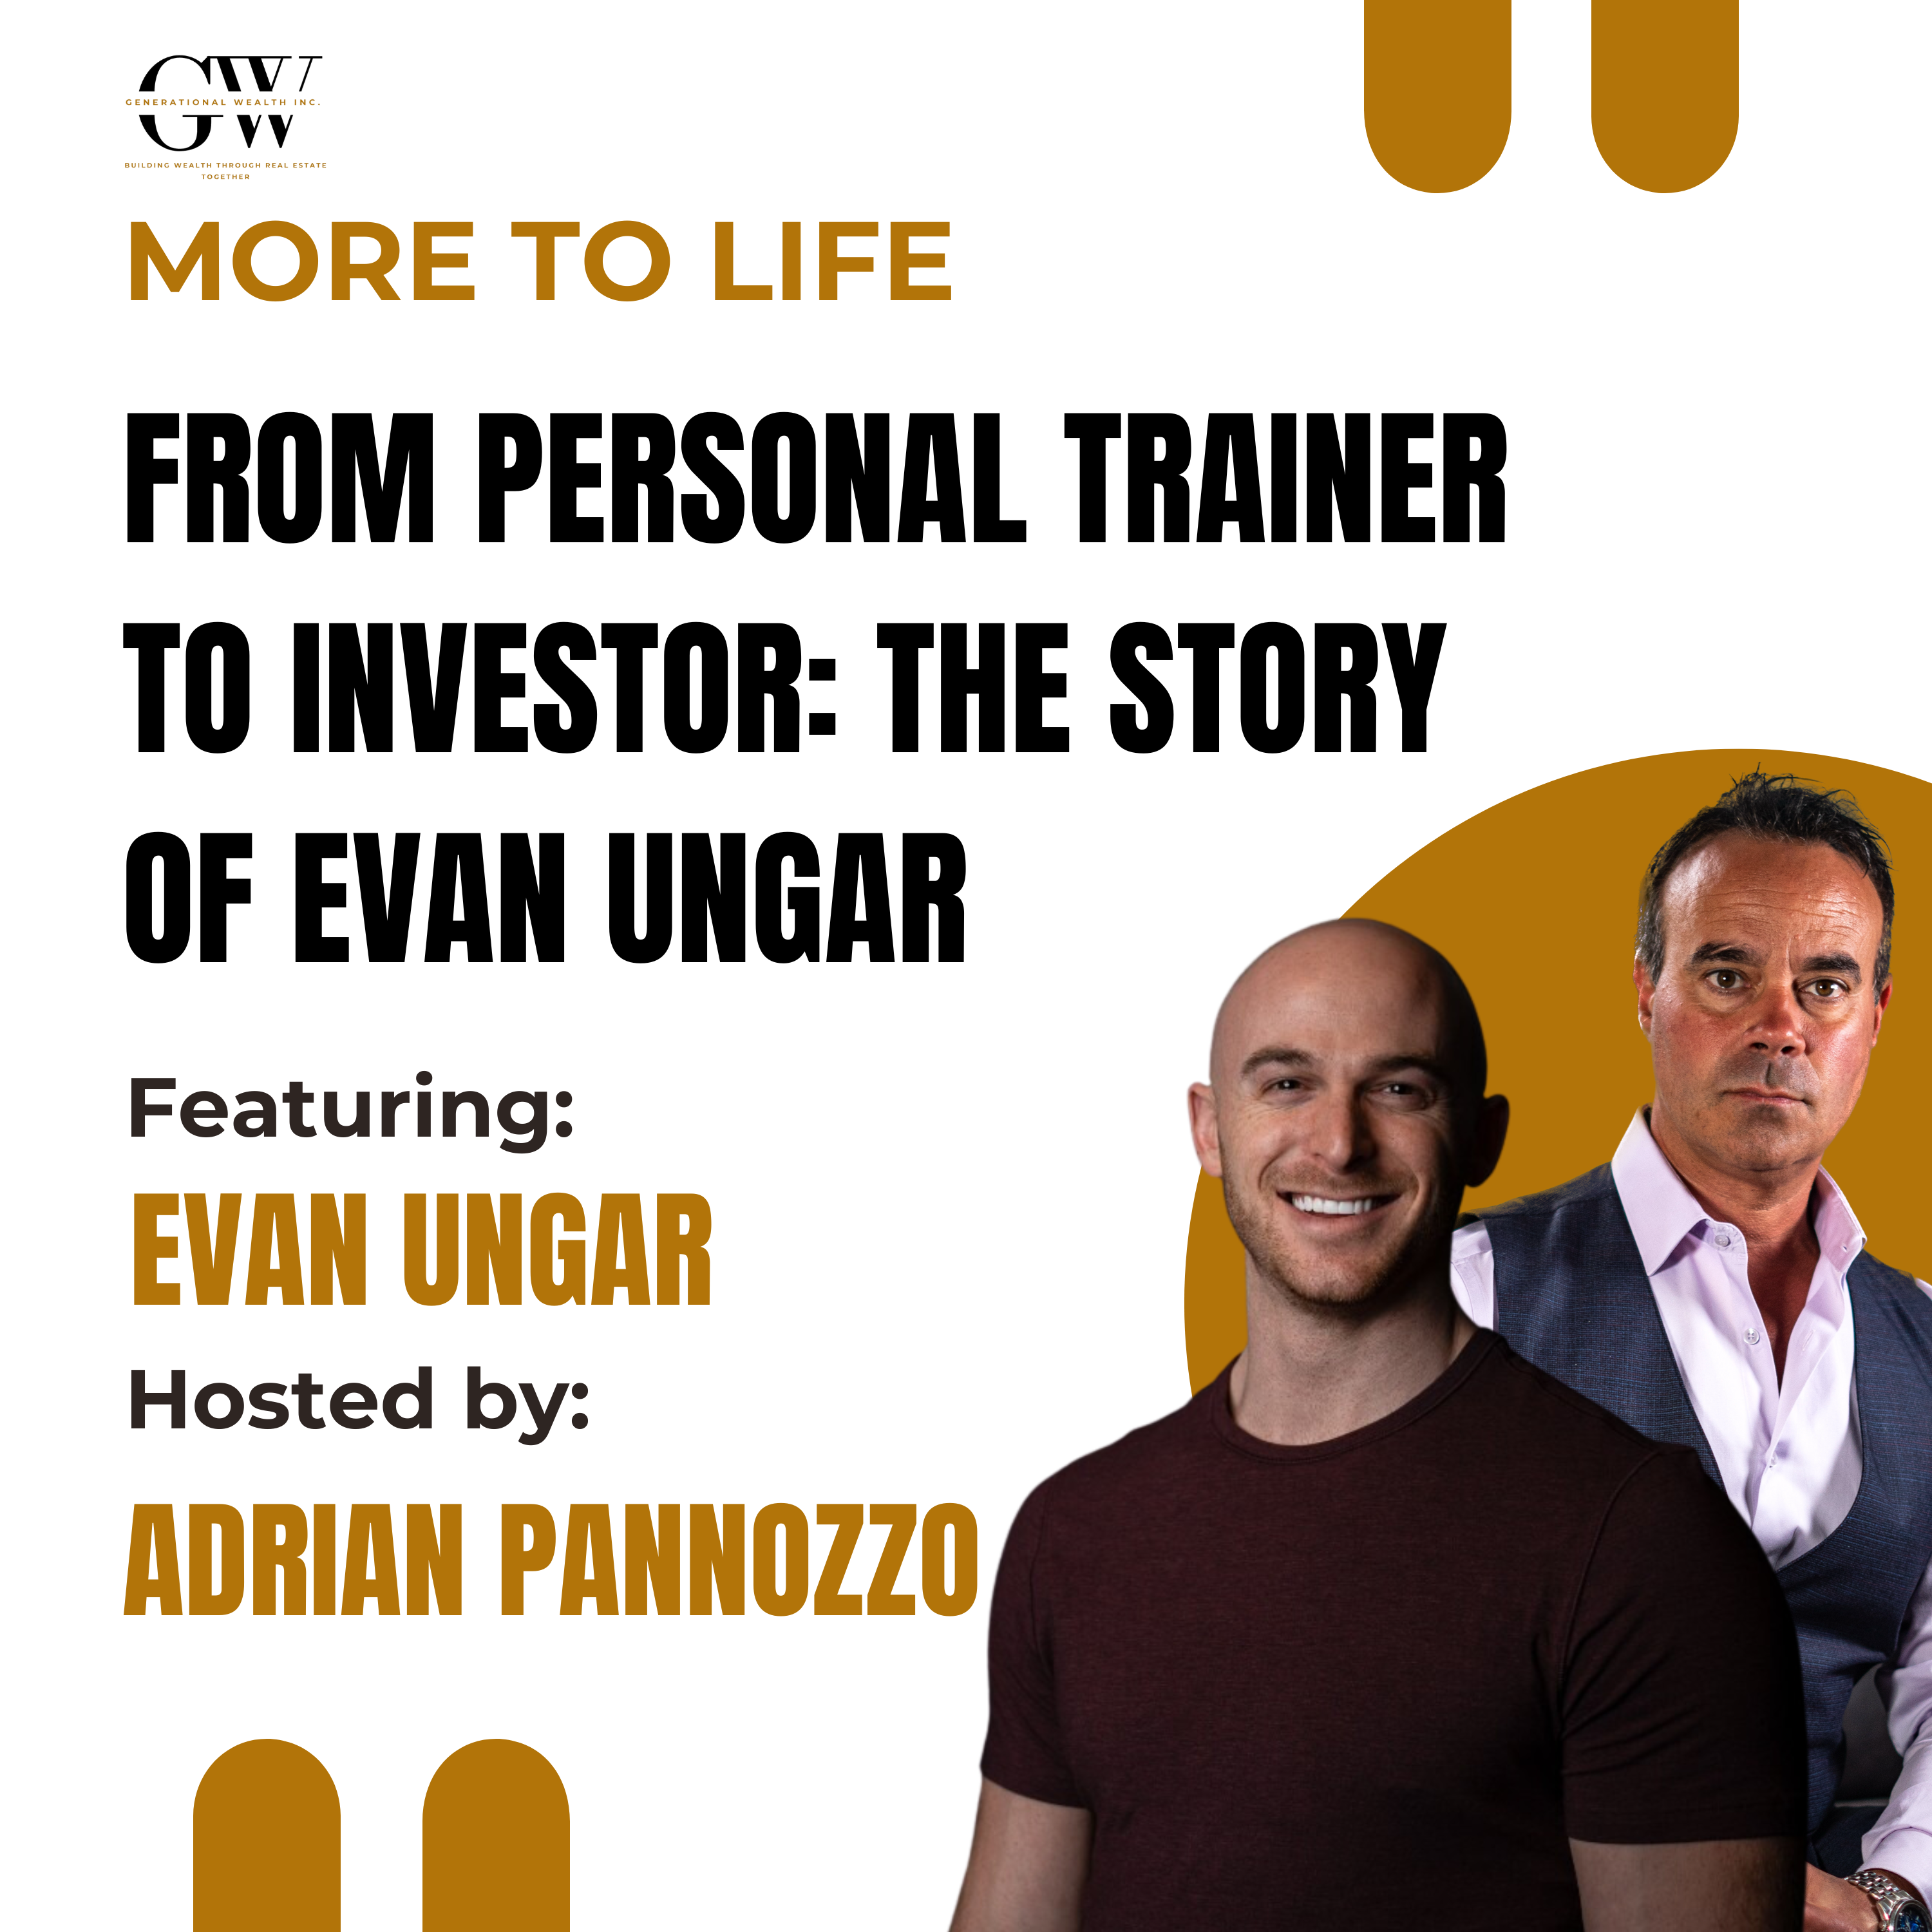 From Personal Trainer to Investor: The Story of Evan Ungar